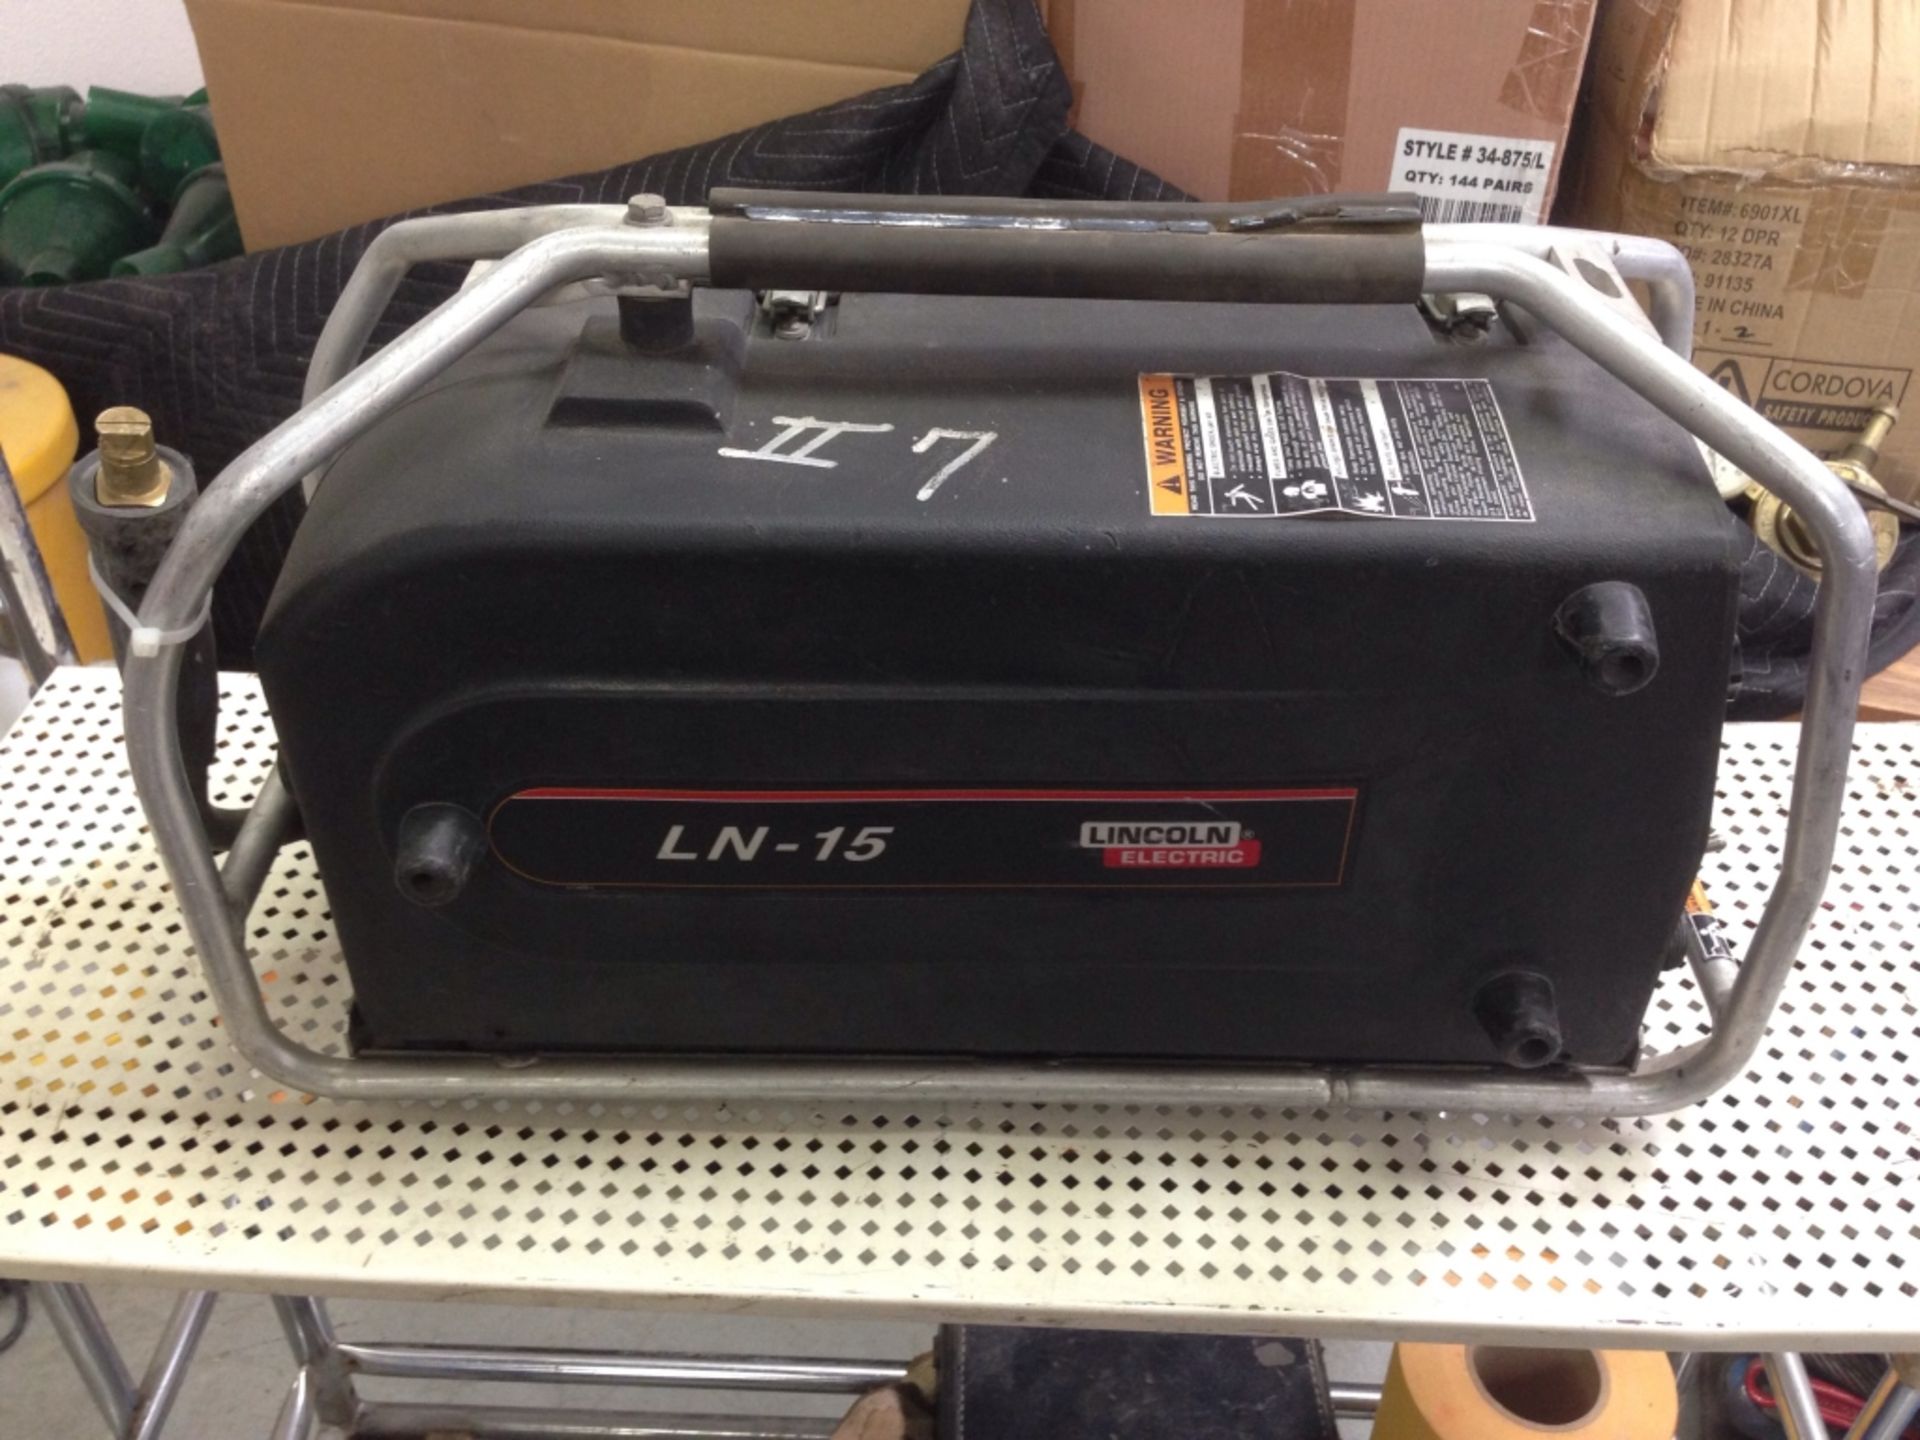 Lincoln electric portable welder - Image 8 of 10